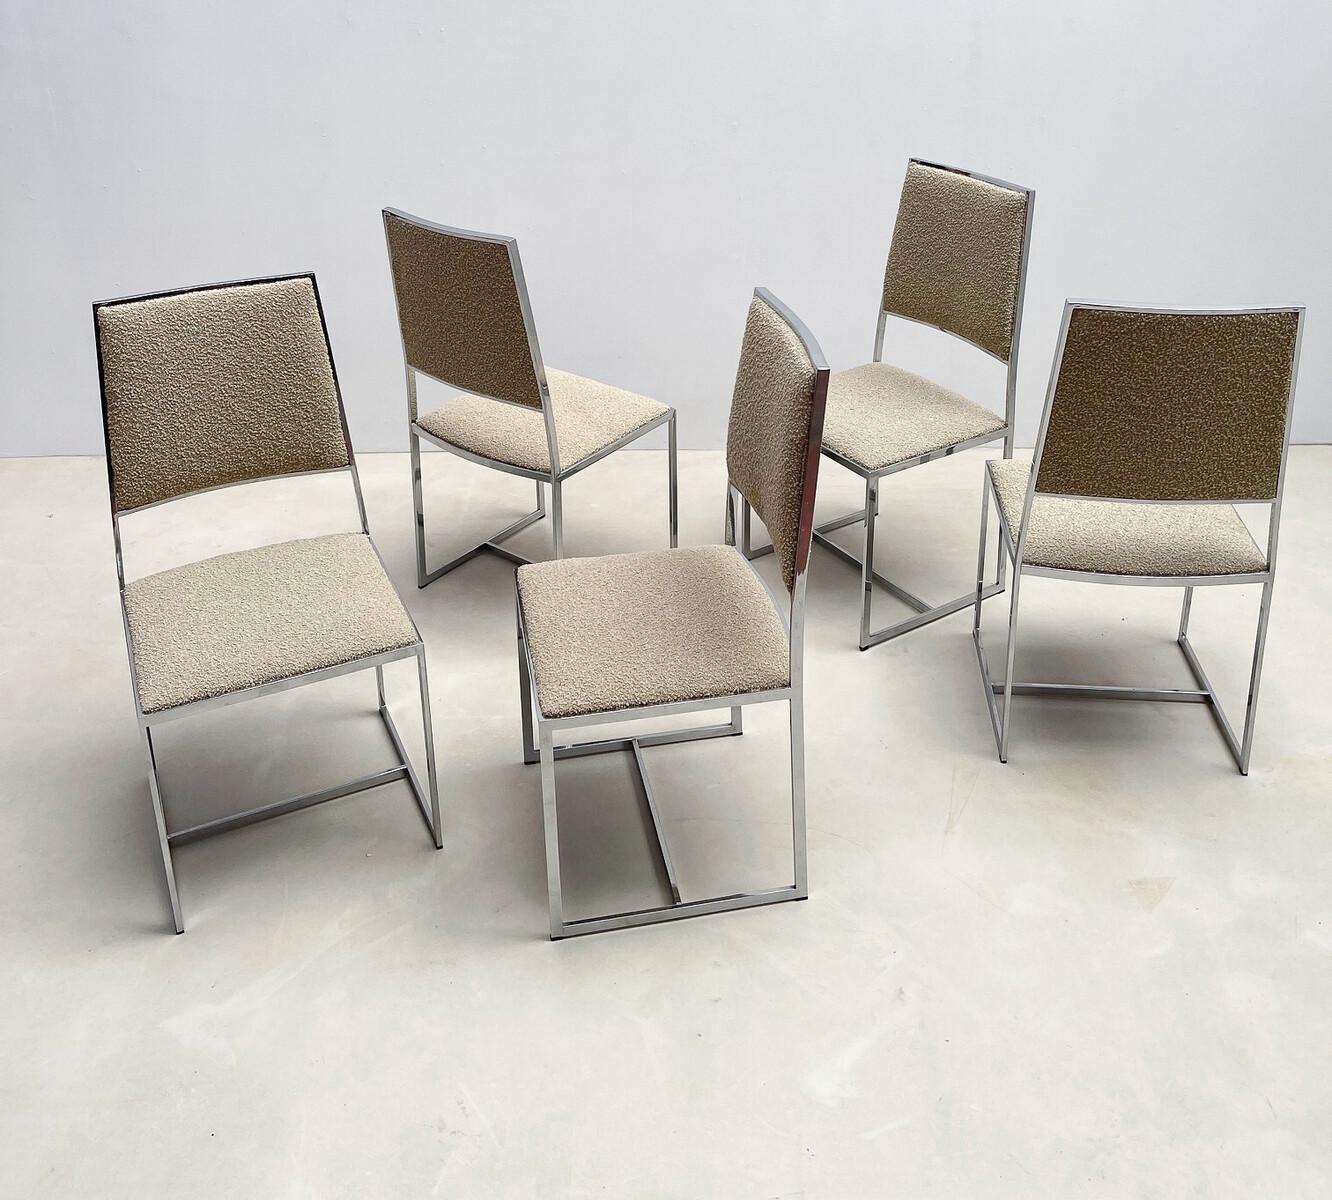 Late 20th Century Mid-Century Modern Set of 5 Chairs Willy Rizzo Style, Chrome and Boucle Fabric For Sale